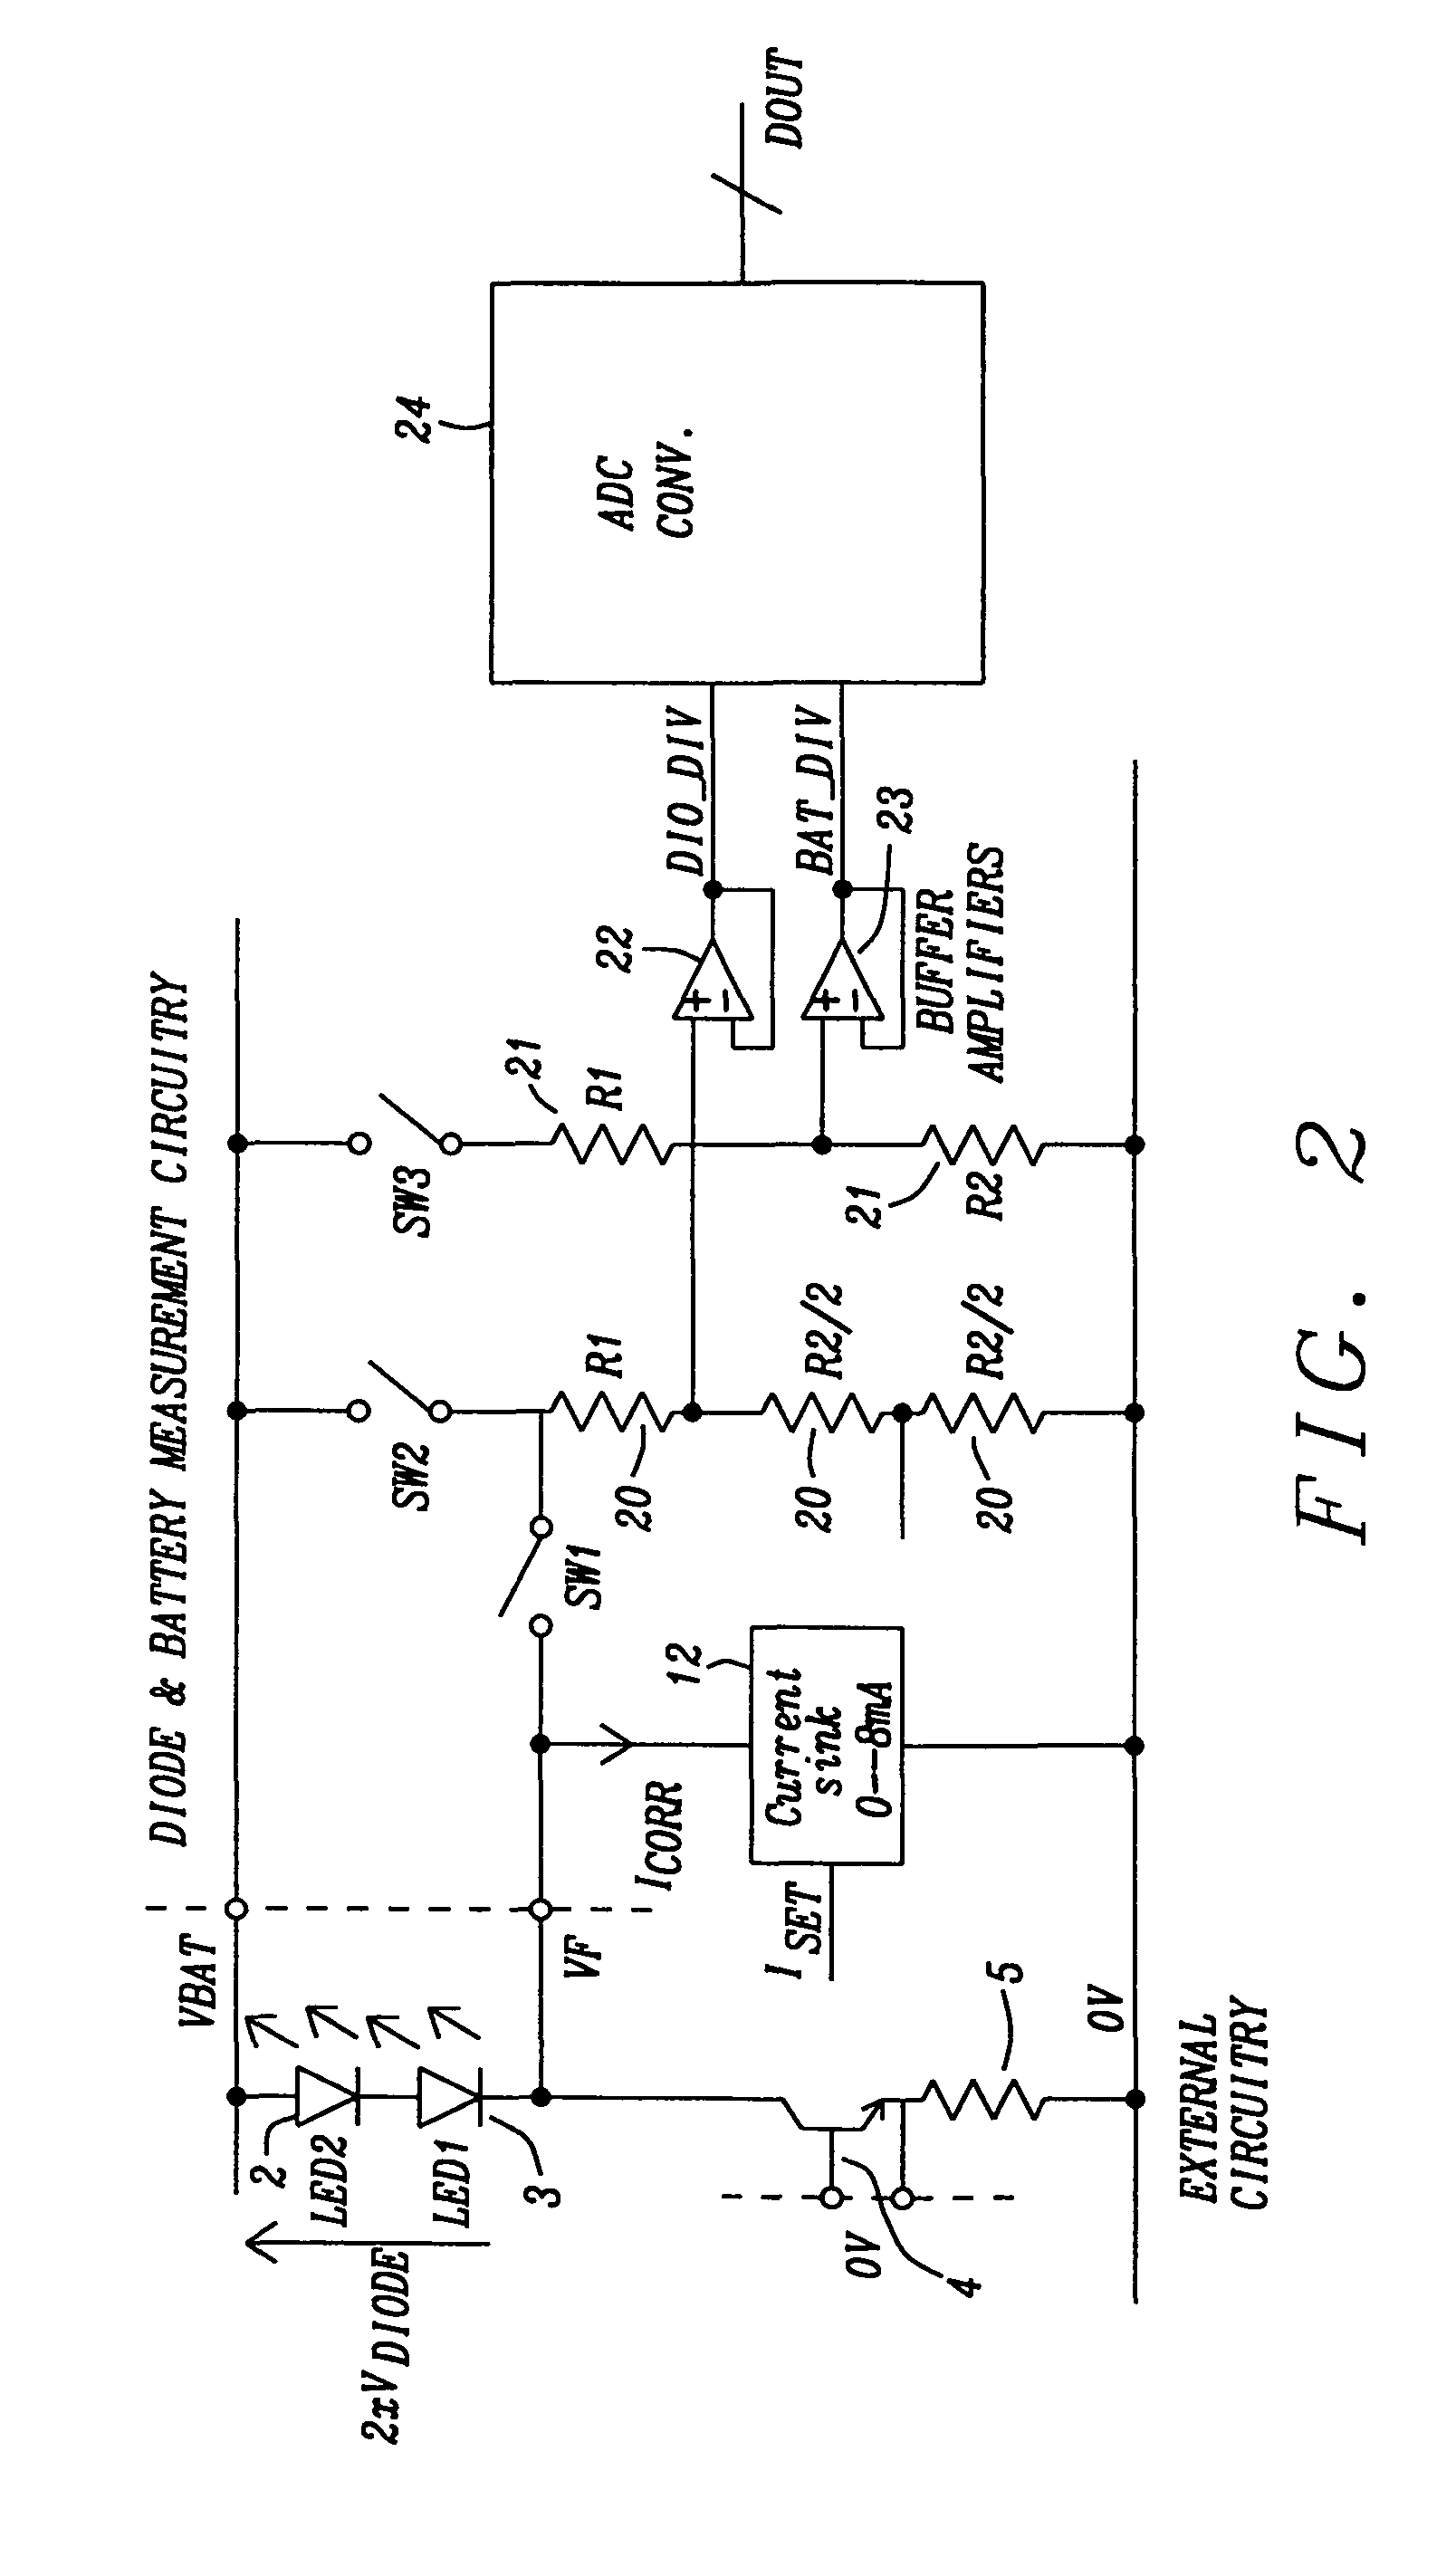 Circuit for driving an infrared transmitter LED with temperature compensation